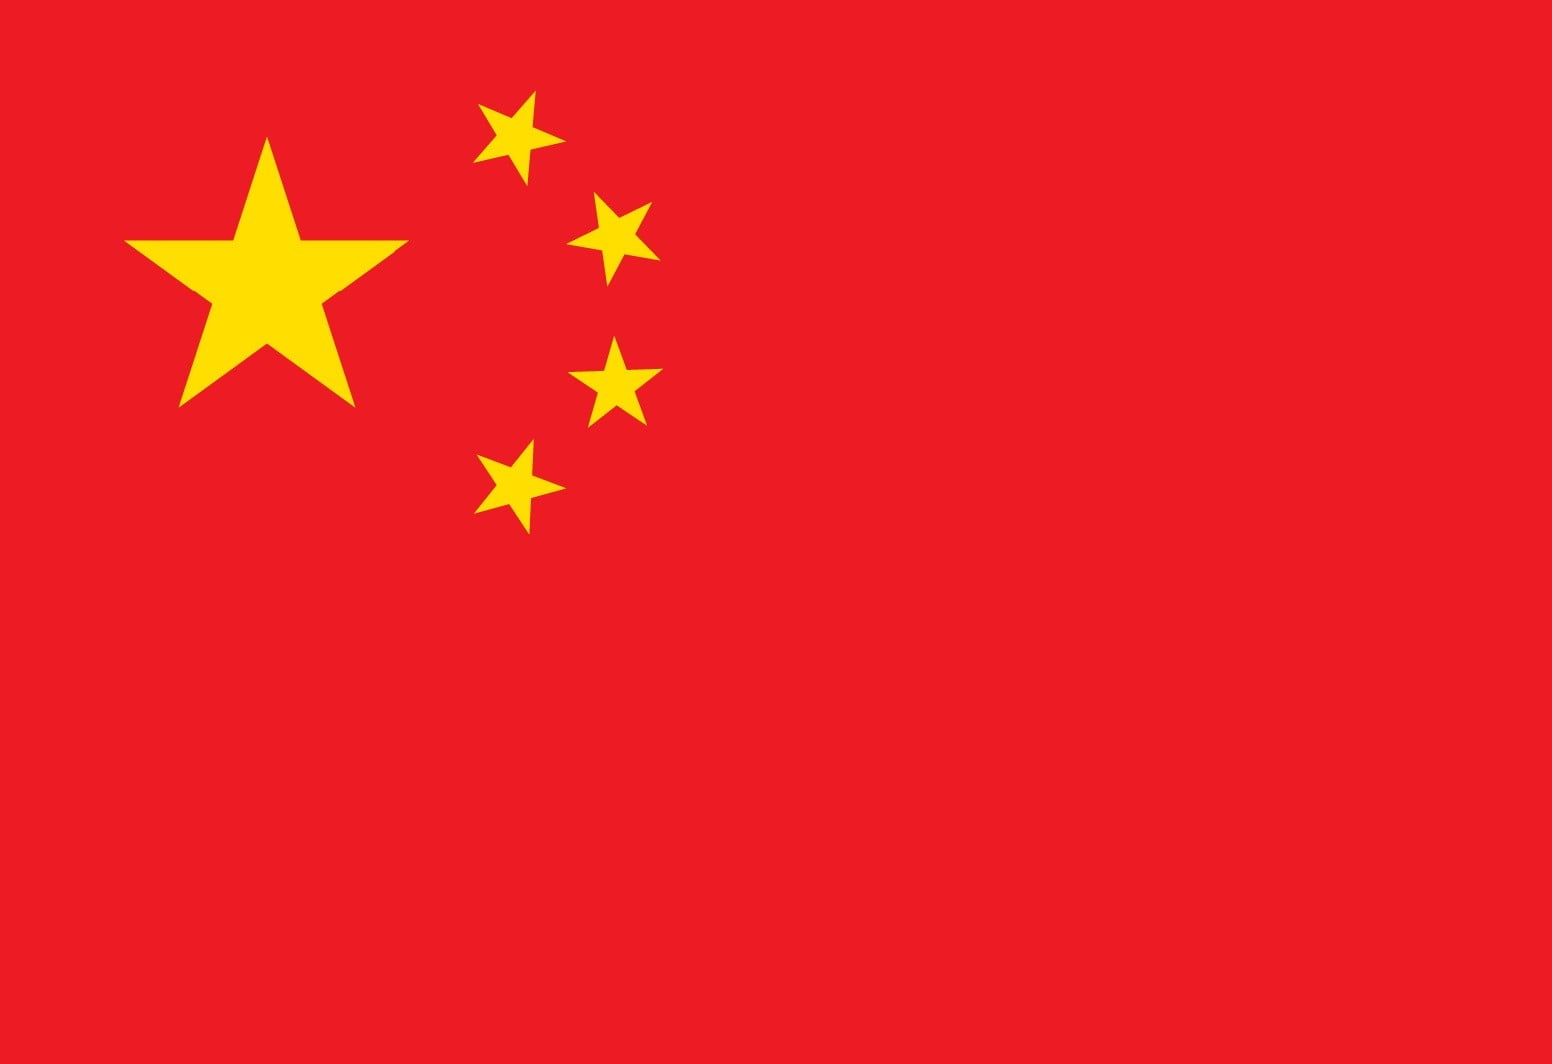 What is the main color on the chinese flag red | The Fact Base